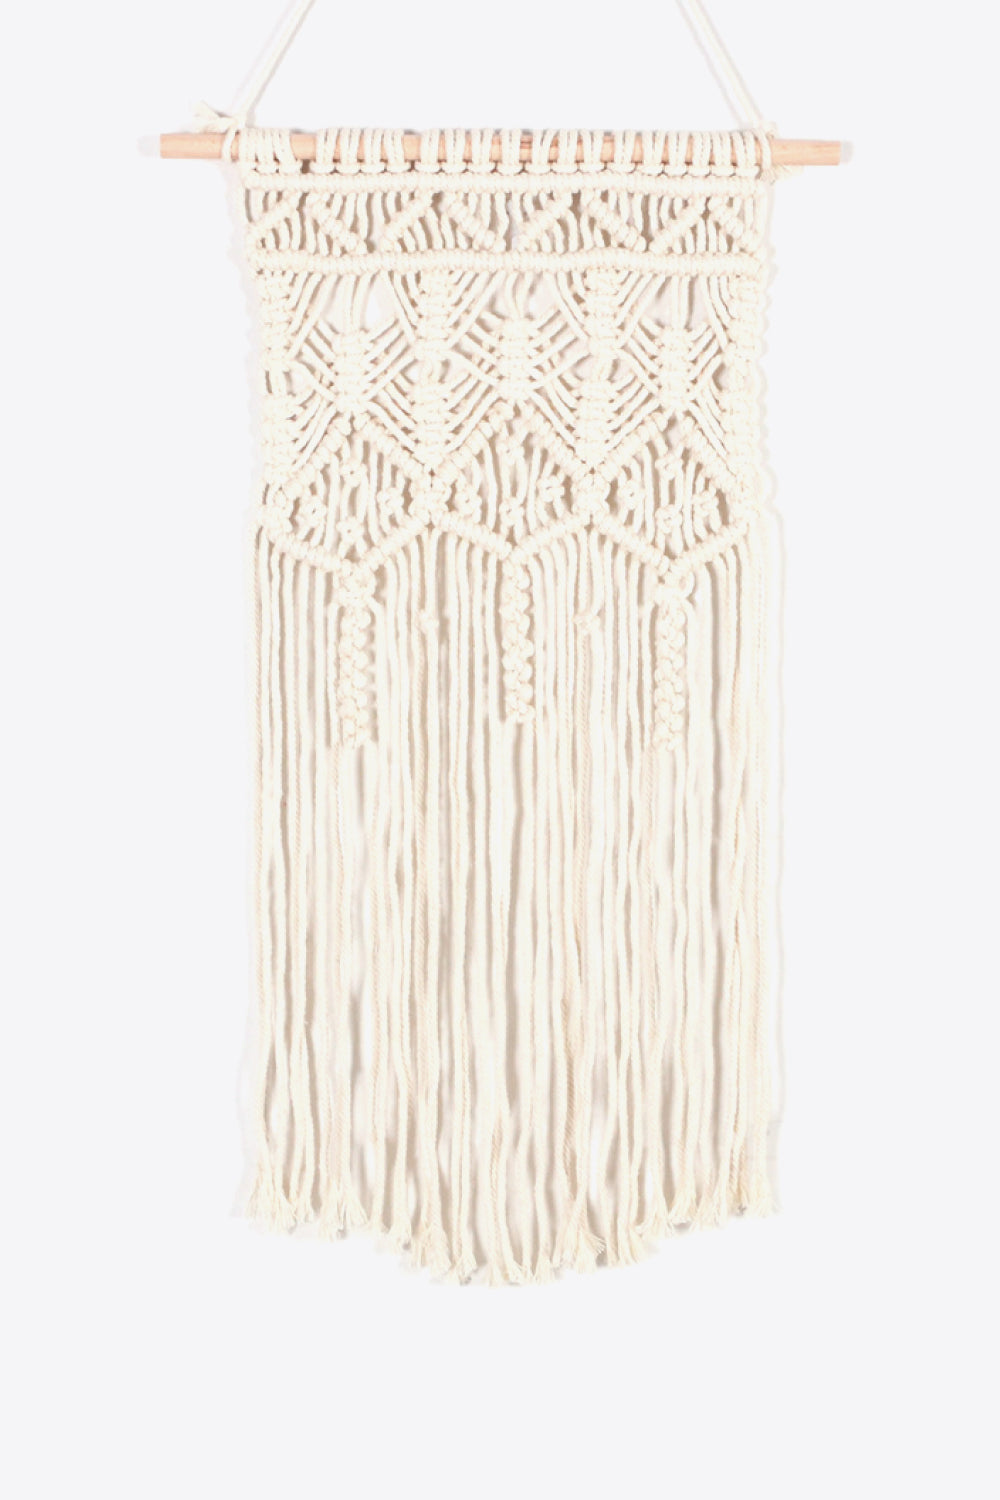 Macrame Bohemian Hand Woven Fringe Wall Hanging Print on any thing USA/STOD clothes